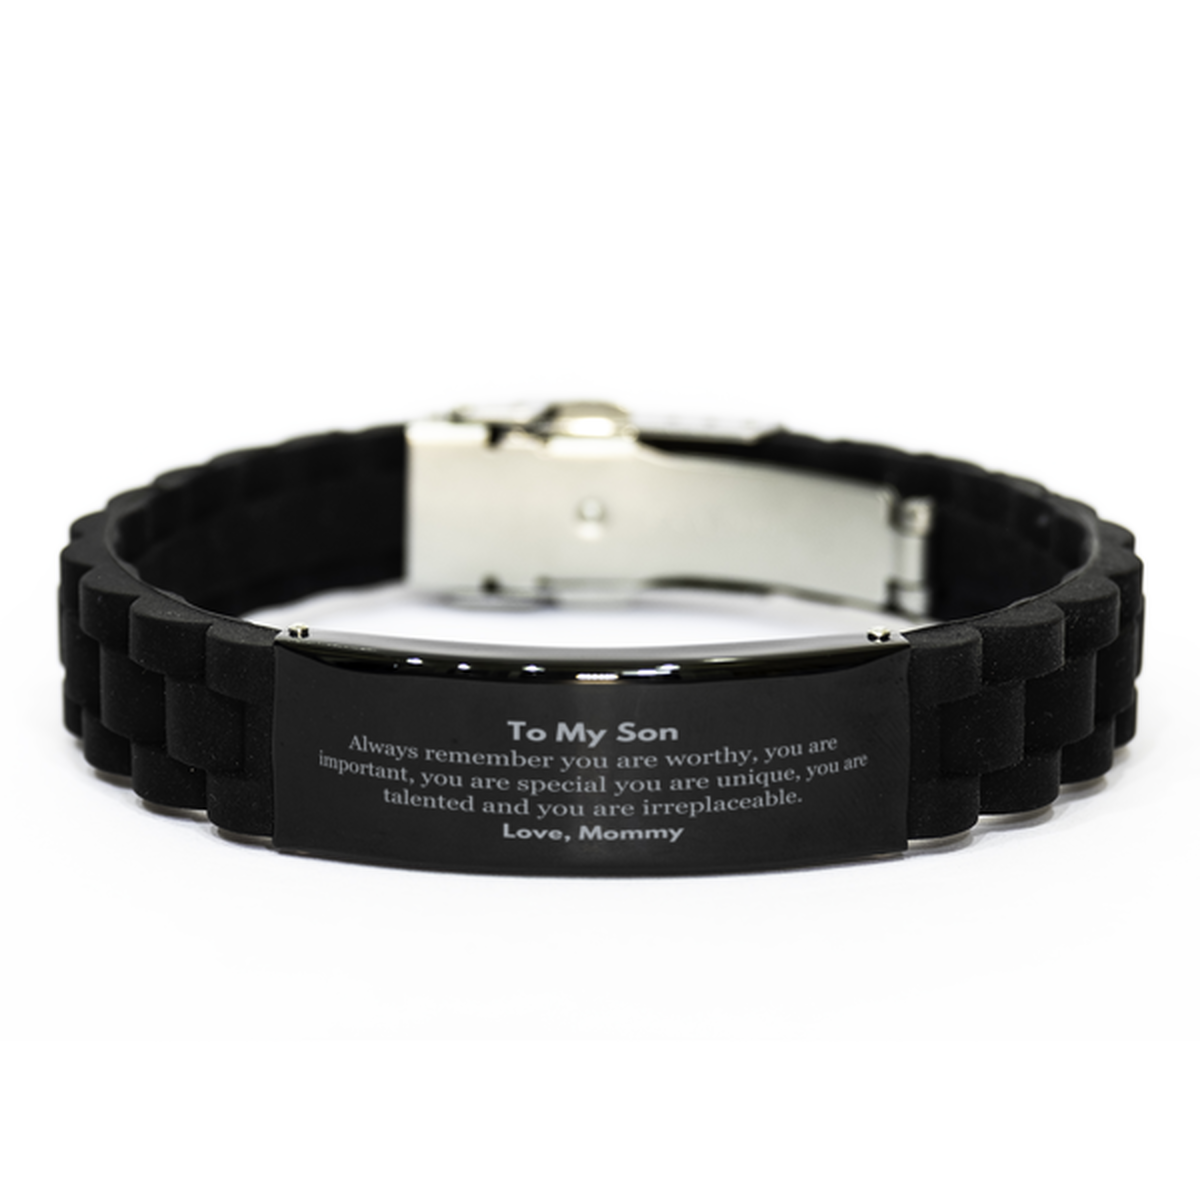 Son Birthday Gifts from Mommy, Inspirational Black Glidelock Clasp Bracelet for Son Christmas Graduation Gifts for Son Always remember you are worthy, you are important. Love, Mommy